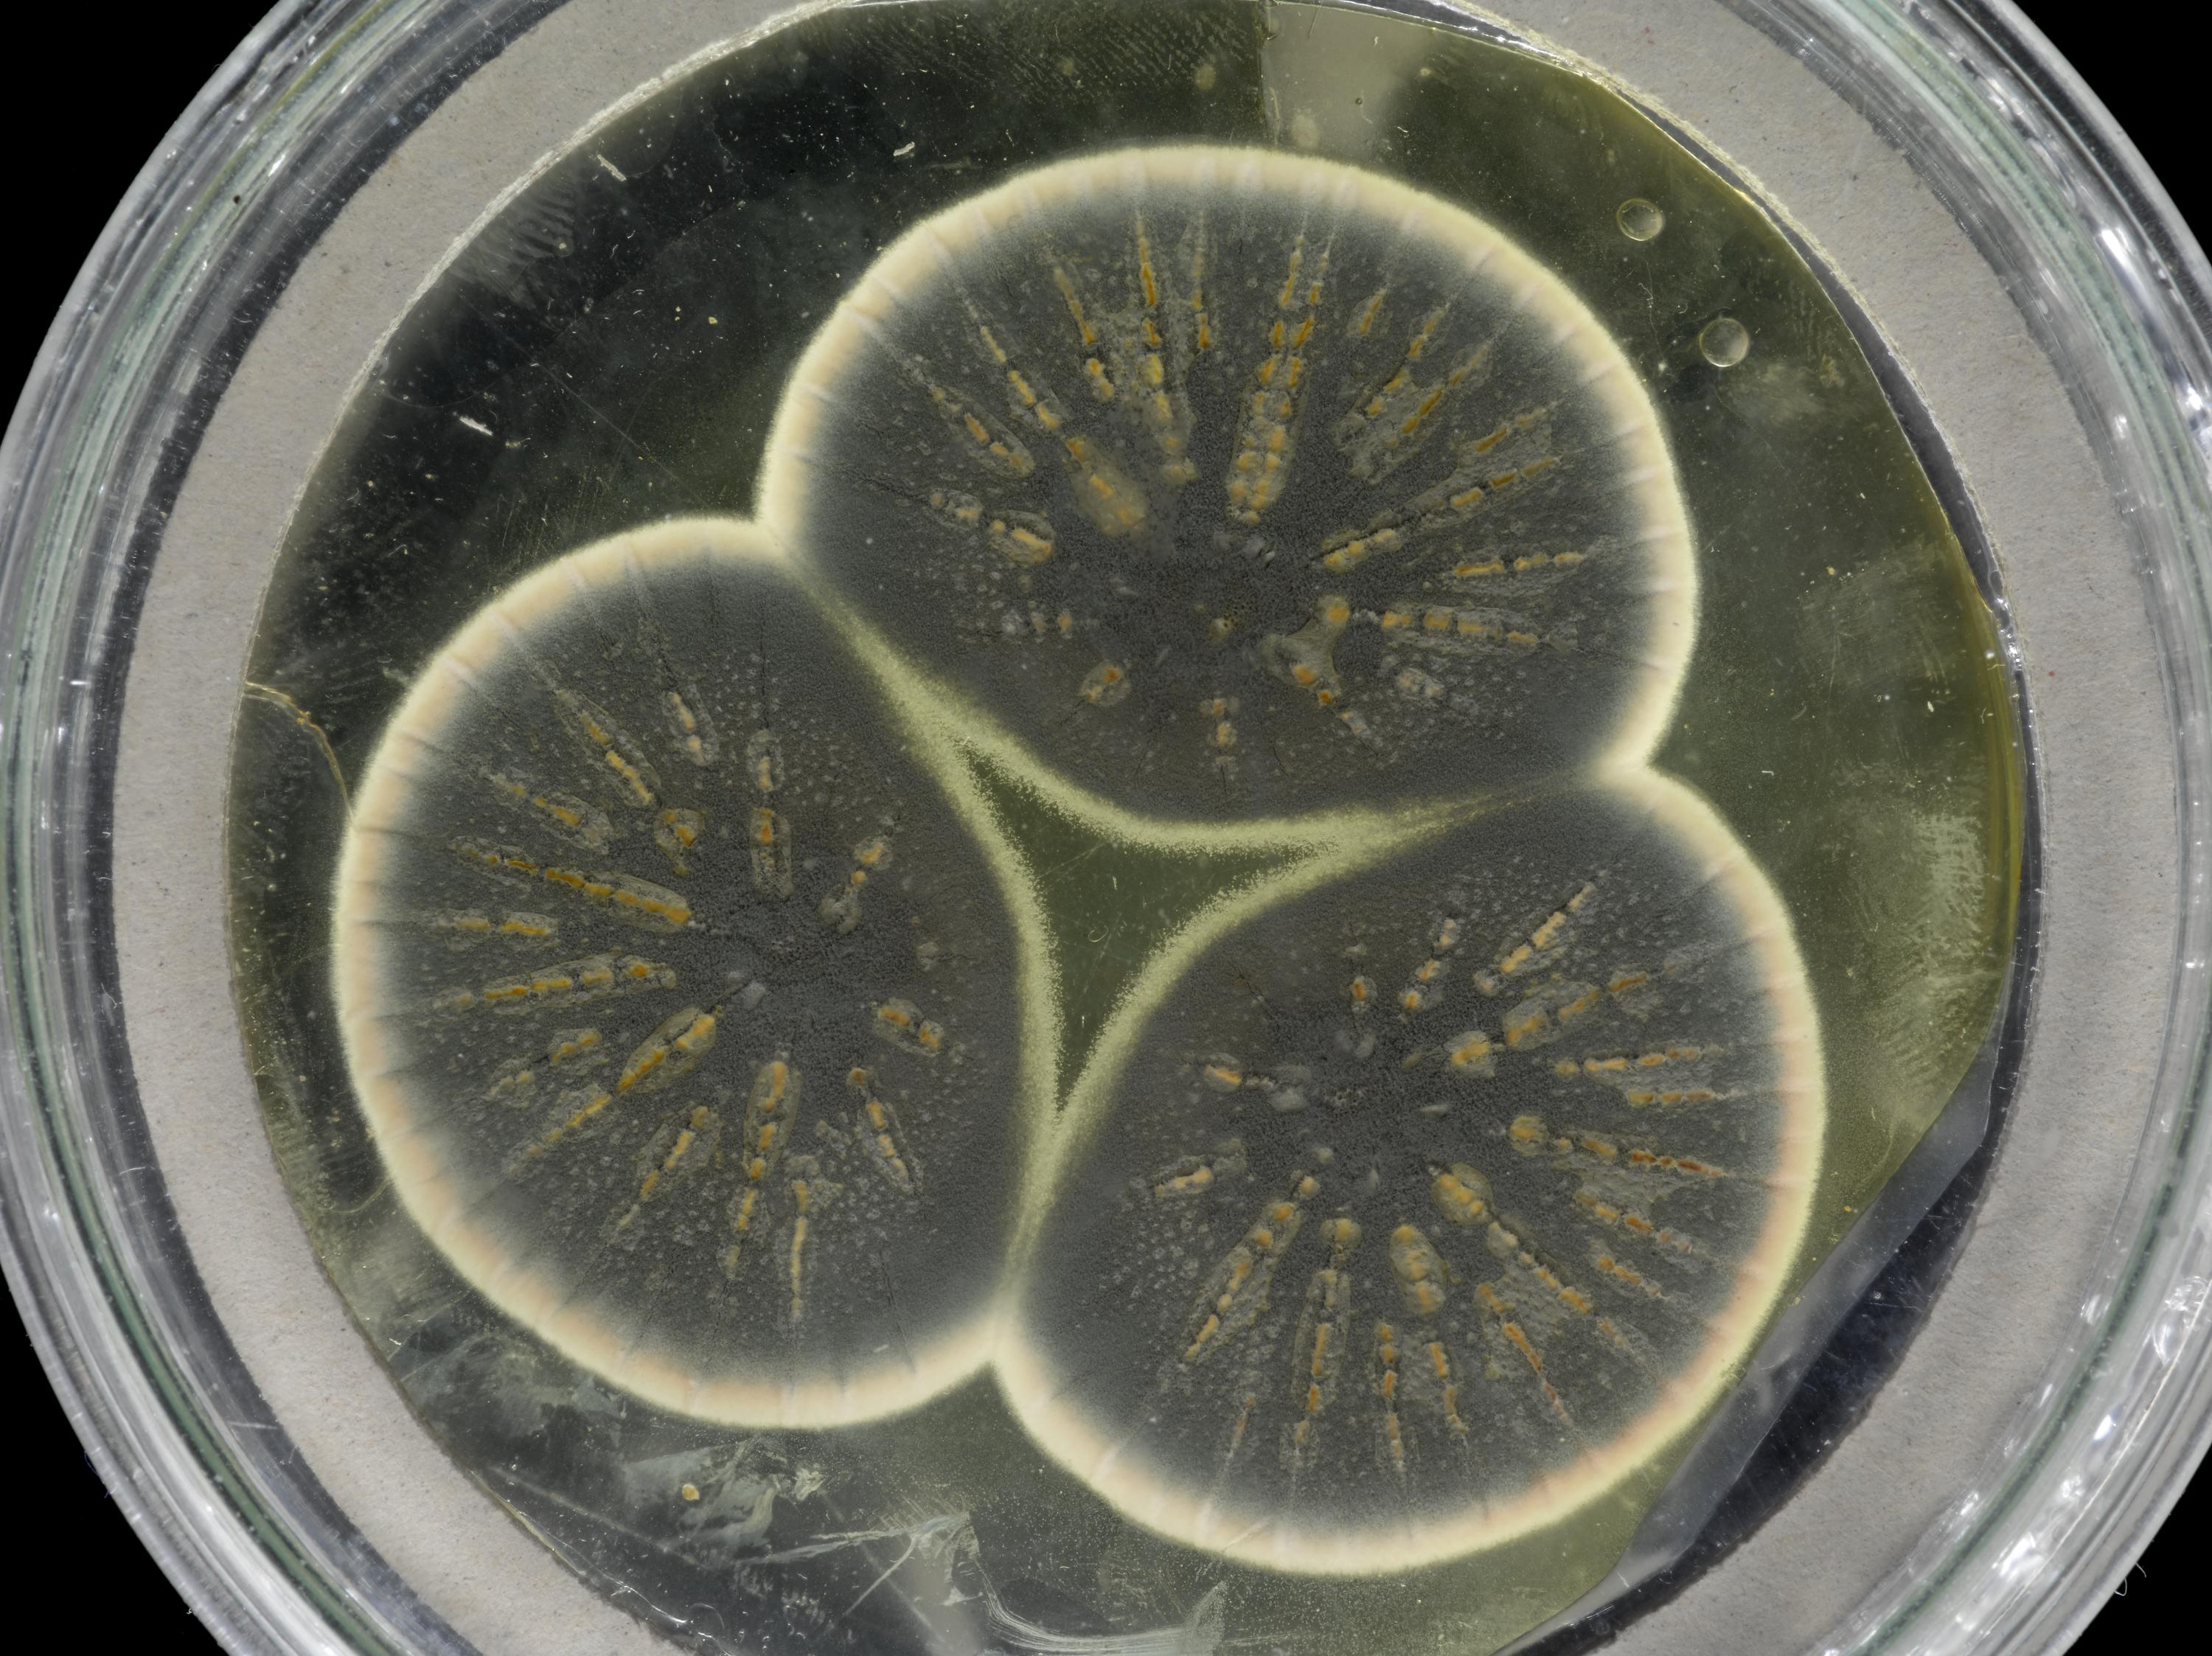 A dried down culture of the fungus Penicillium rubens derived from Sir Alexander Flemings penicillin producing strain, deposited in the CABI (Centre for Agriculture and Biosciences International) culture collection in the 1940s. This dish contains penicillium spores taken from Alexander Flemings research plates. By being fungal spores, this growth from 2017 is a clone of the penicillium that is commonly benchmarked as the first recorded observation of penicillin in 1928. The publication of his findings from this mould would lead him to share the Nobel Prize with associates Fleury and Chain in 1945.